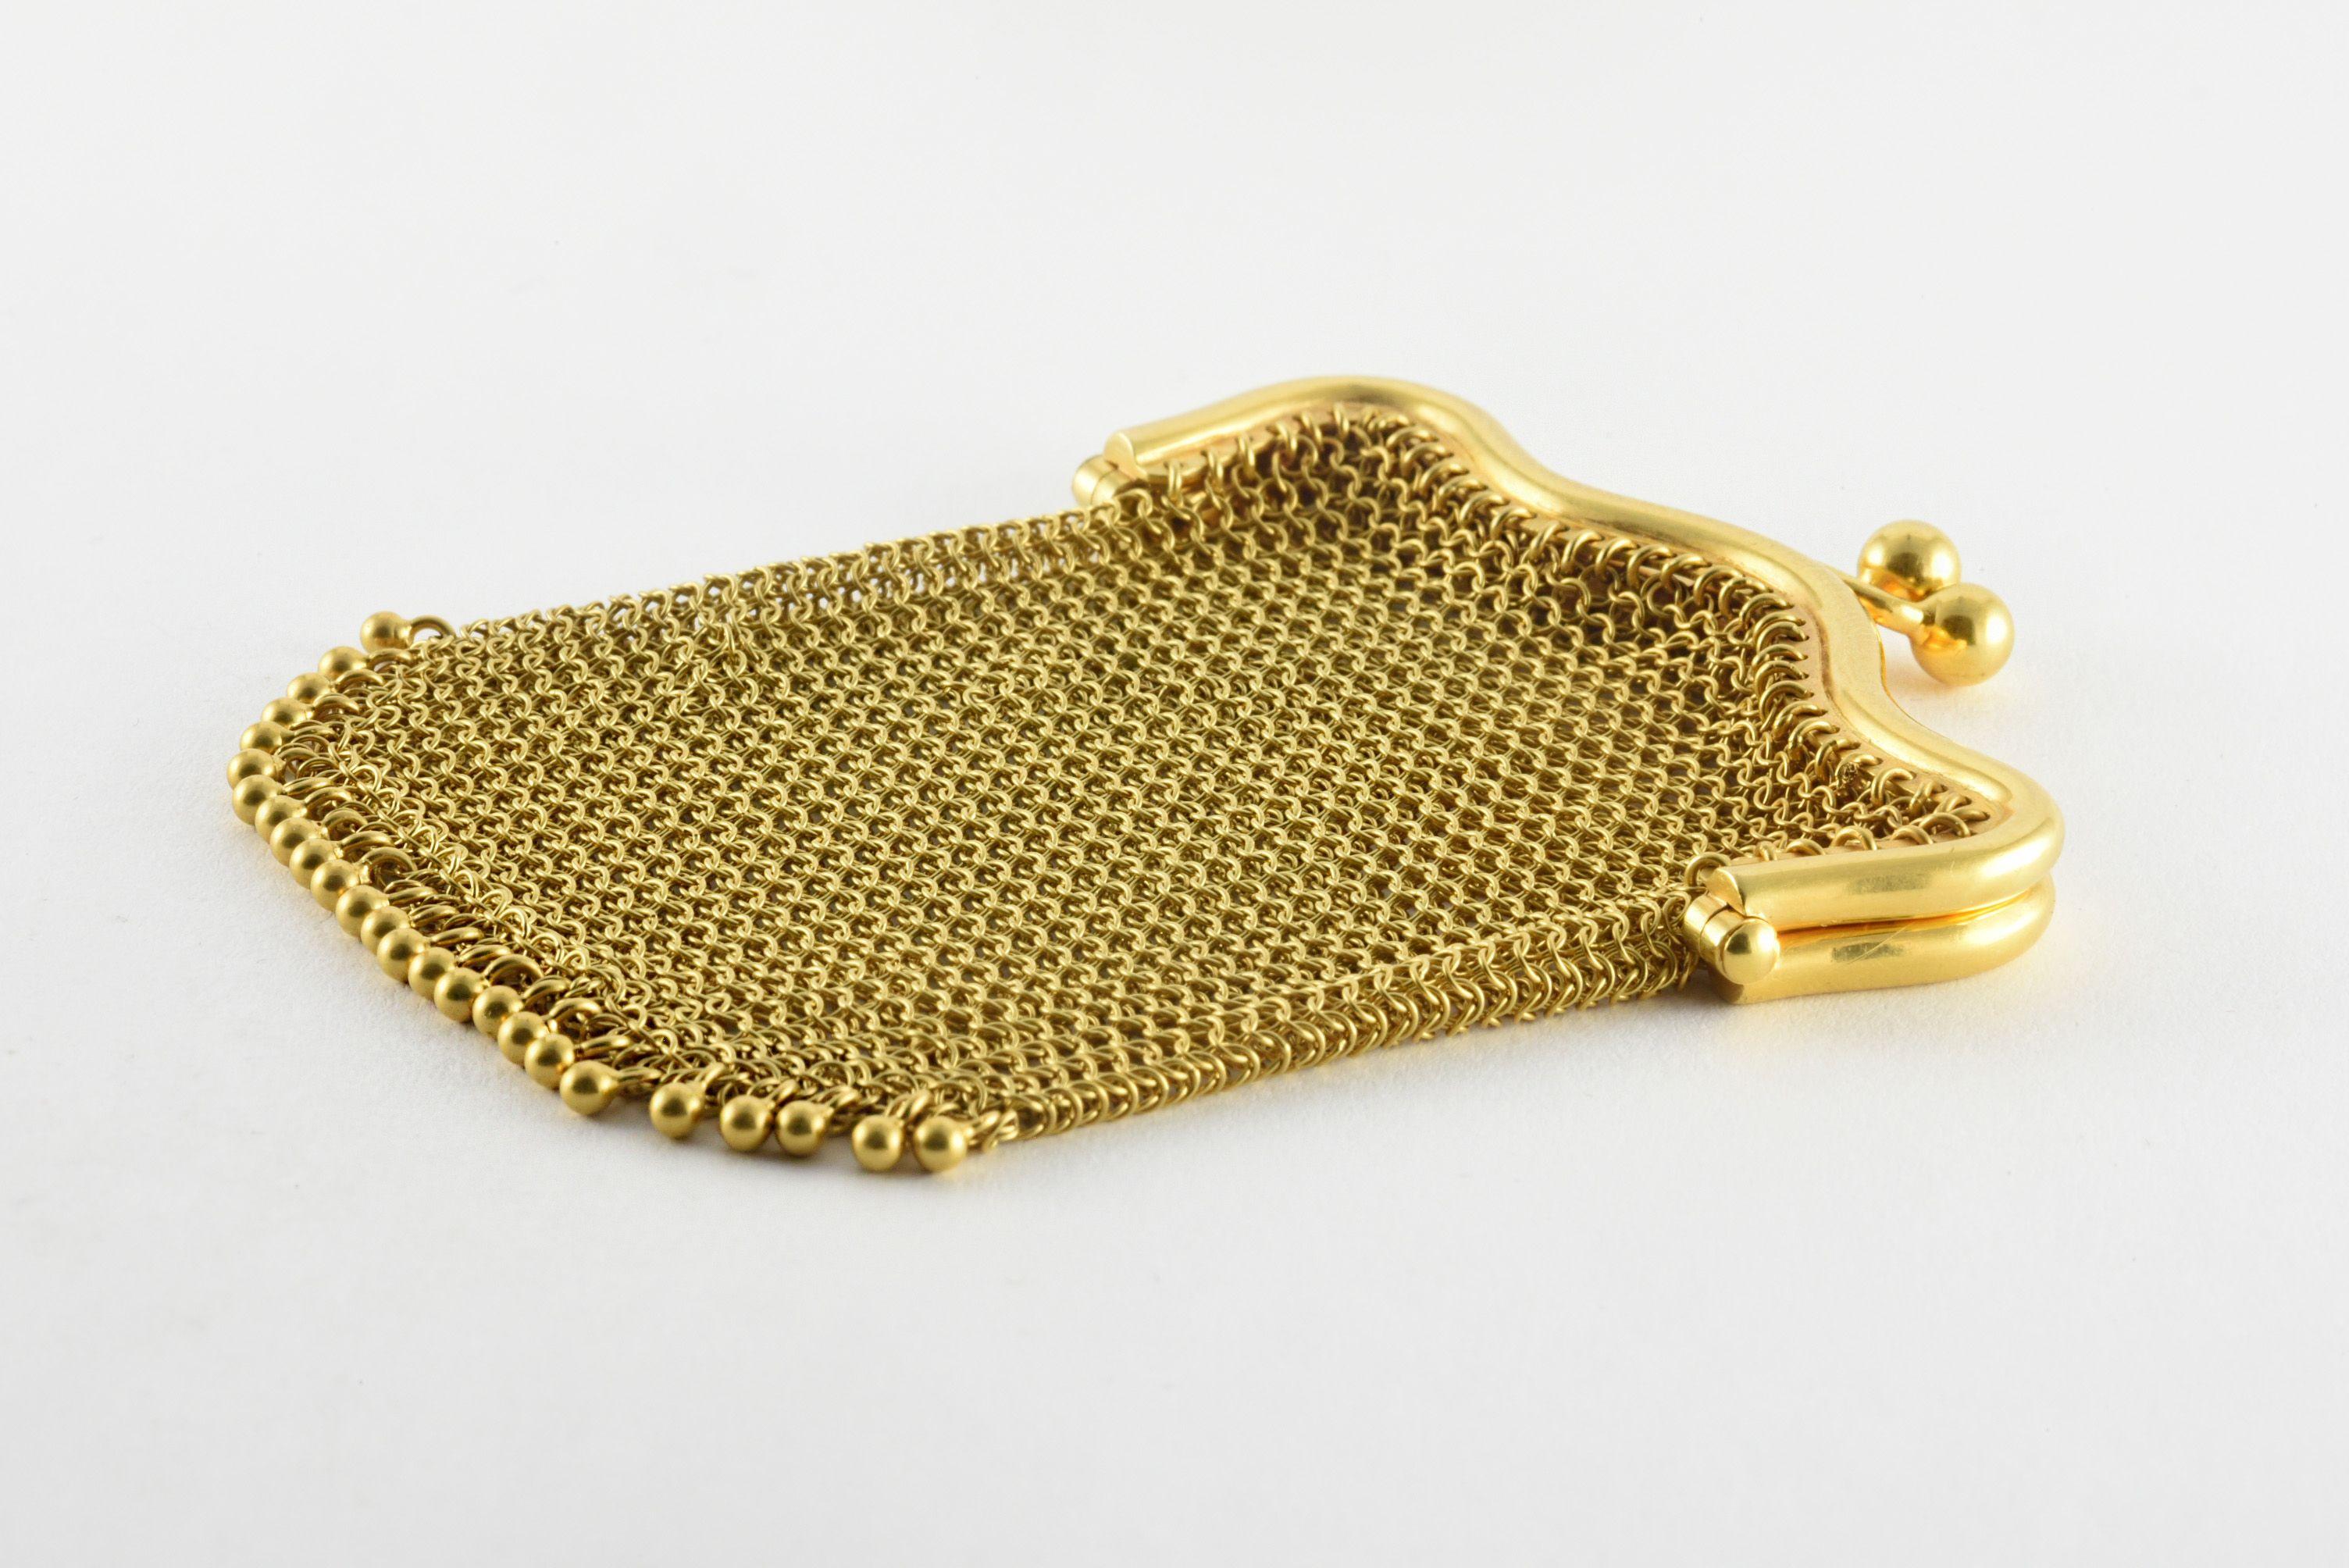 This antique mini mesh clutch fashioned from 18kt yellow gold features a kiss lock fastener and decorative “fringe” at the bottom. It is likely from the turn of the twentieth century as mesh bags like these were made popular in the early 1880s. This